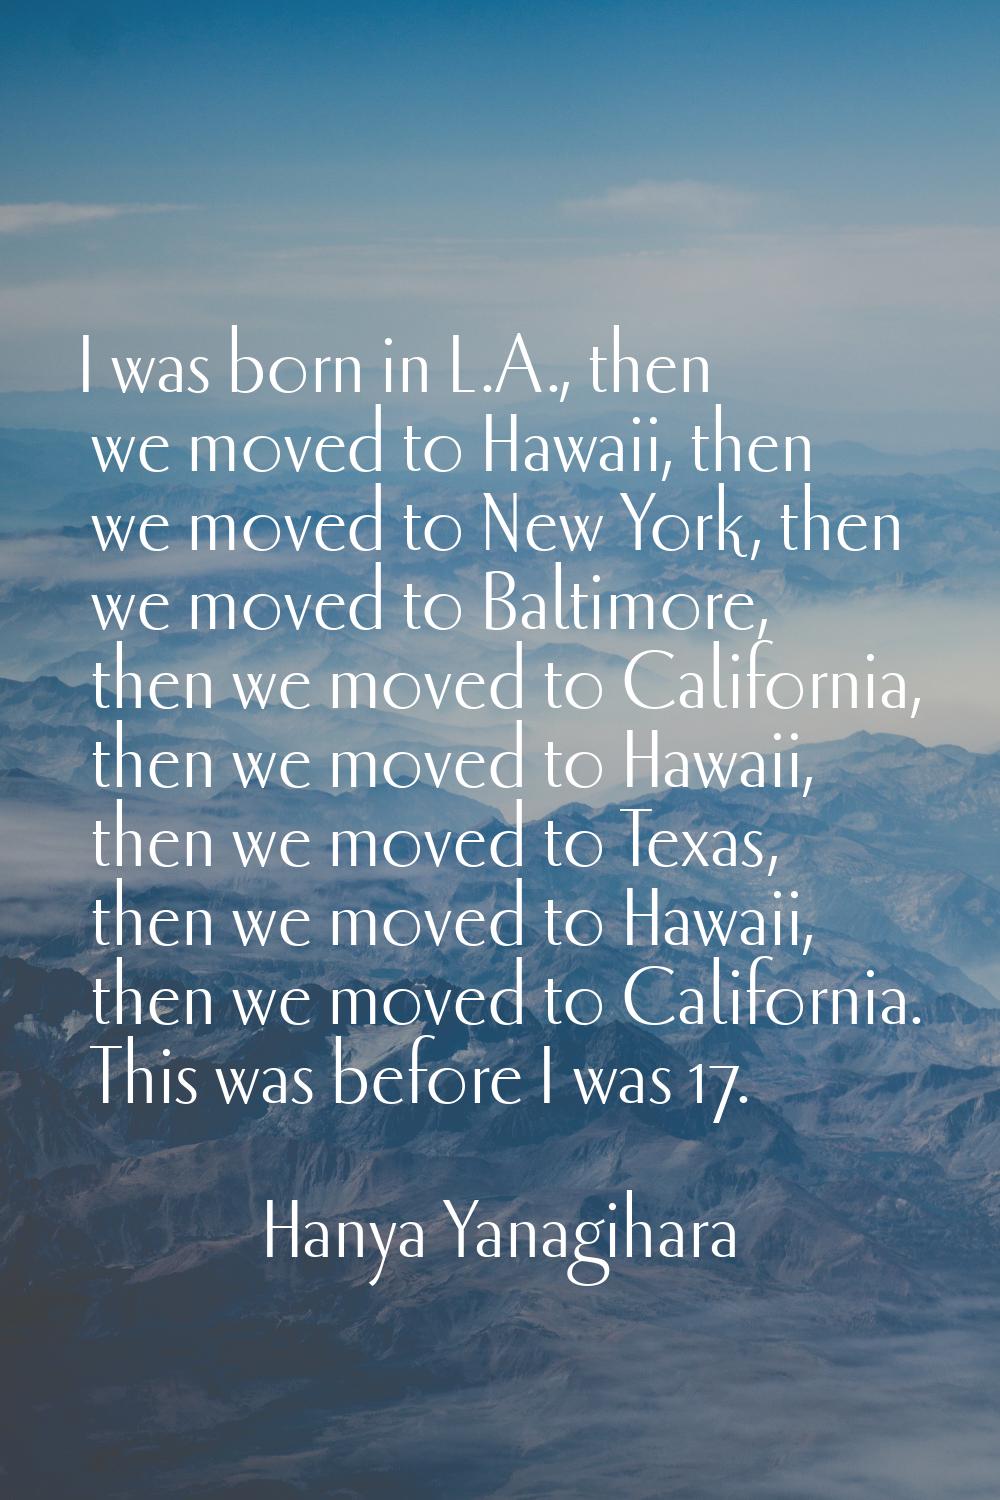 I was born in L.A., then we moved to Hawaii, then we moved to New York, then we moved to Baltimore,